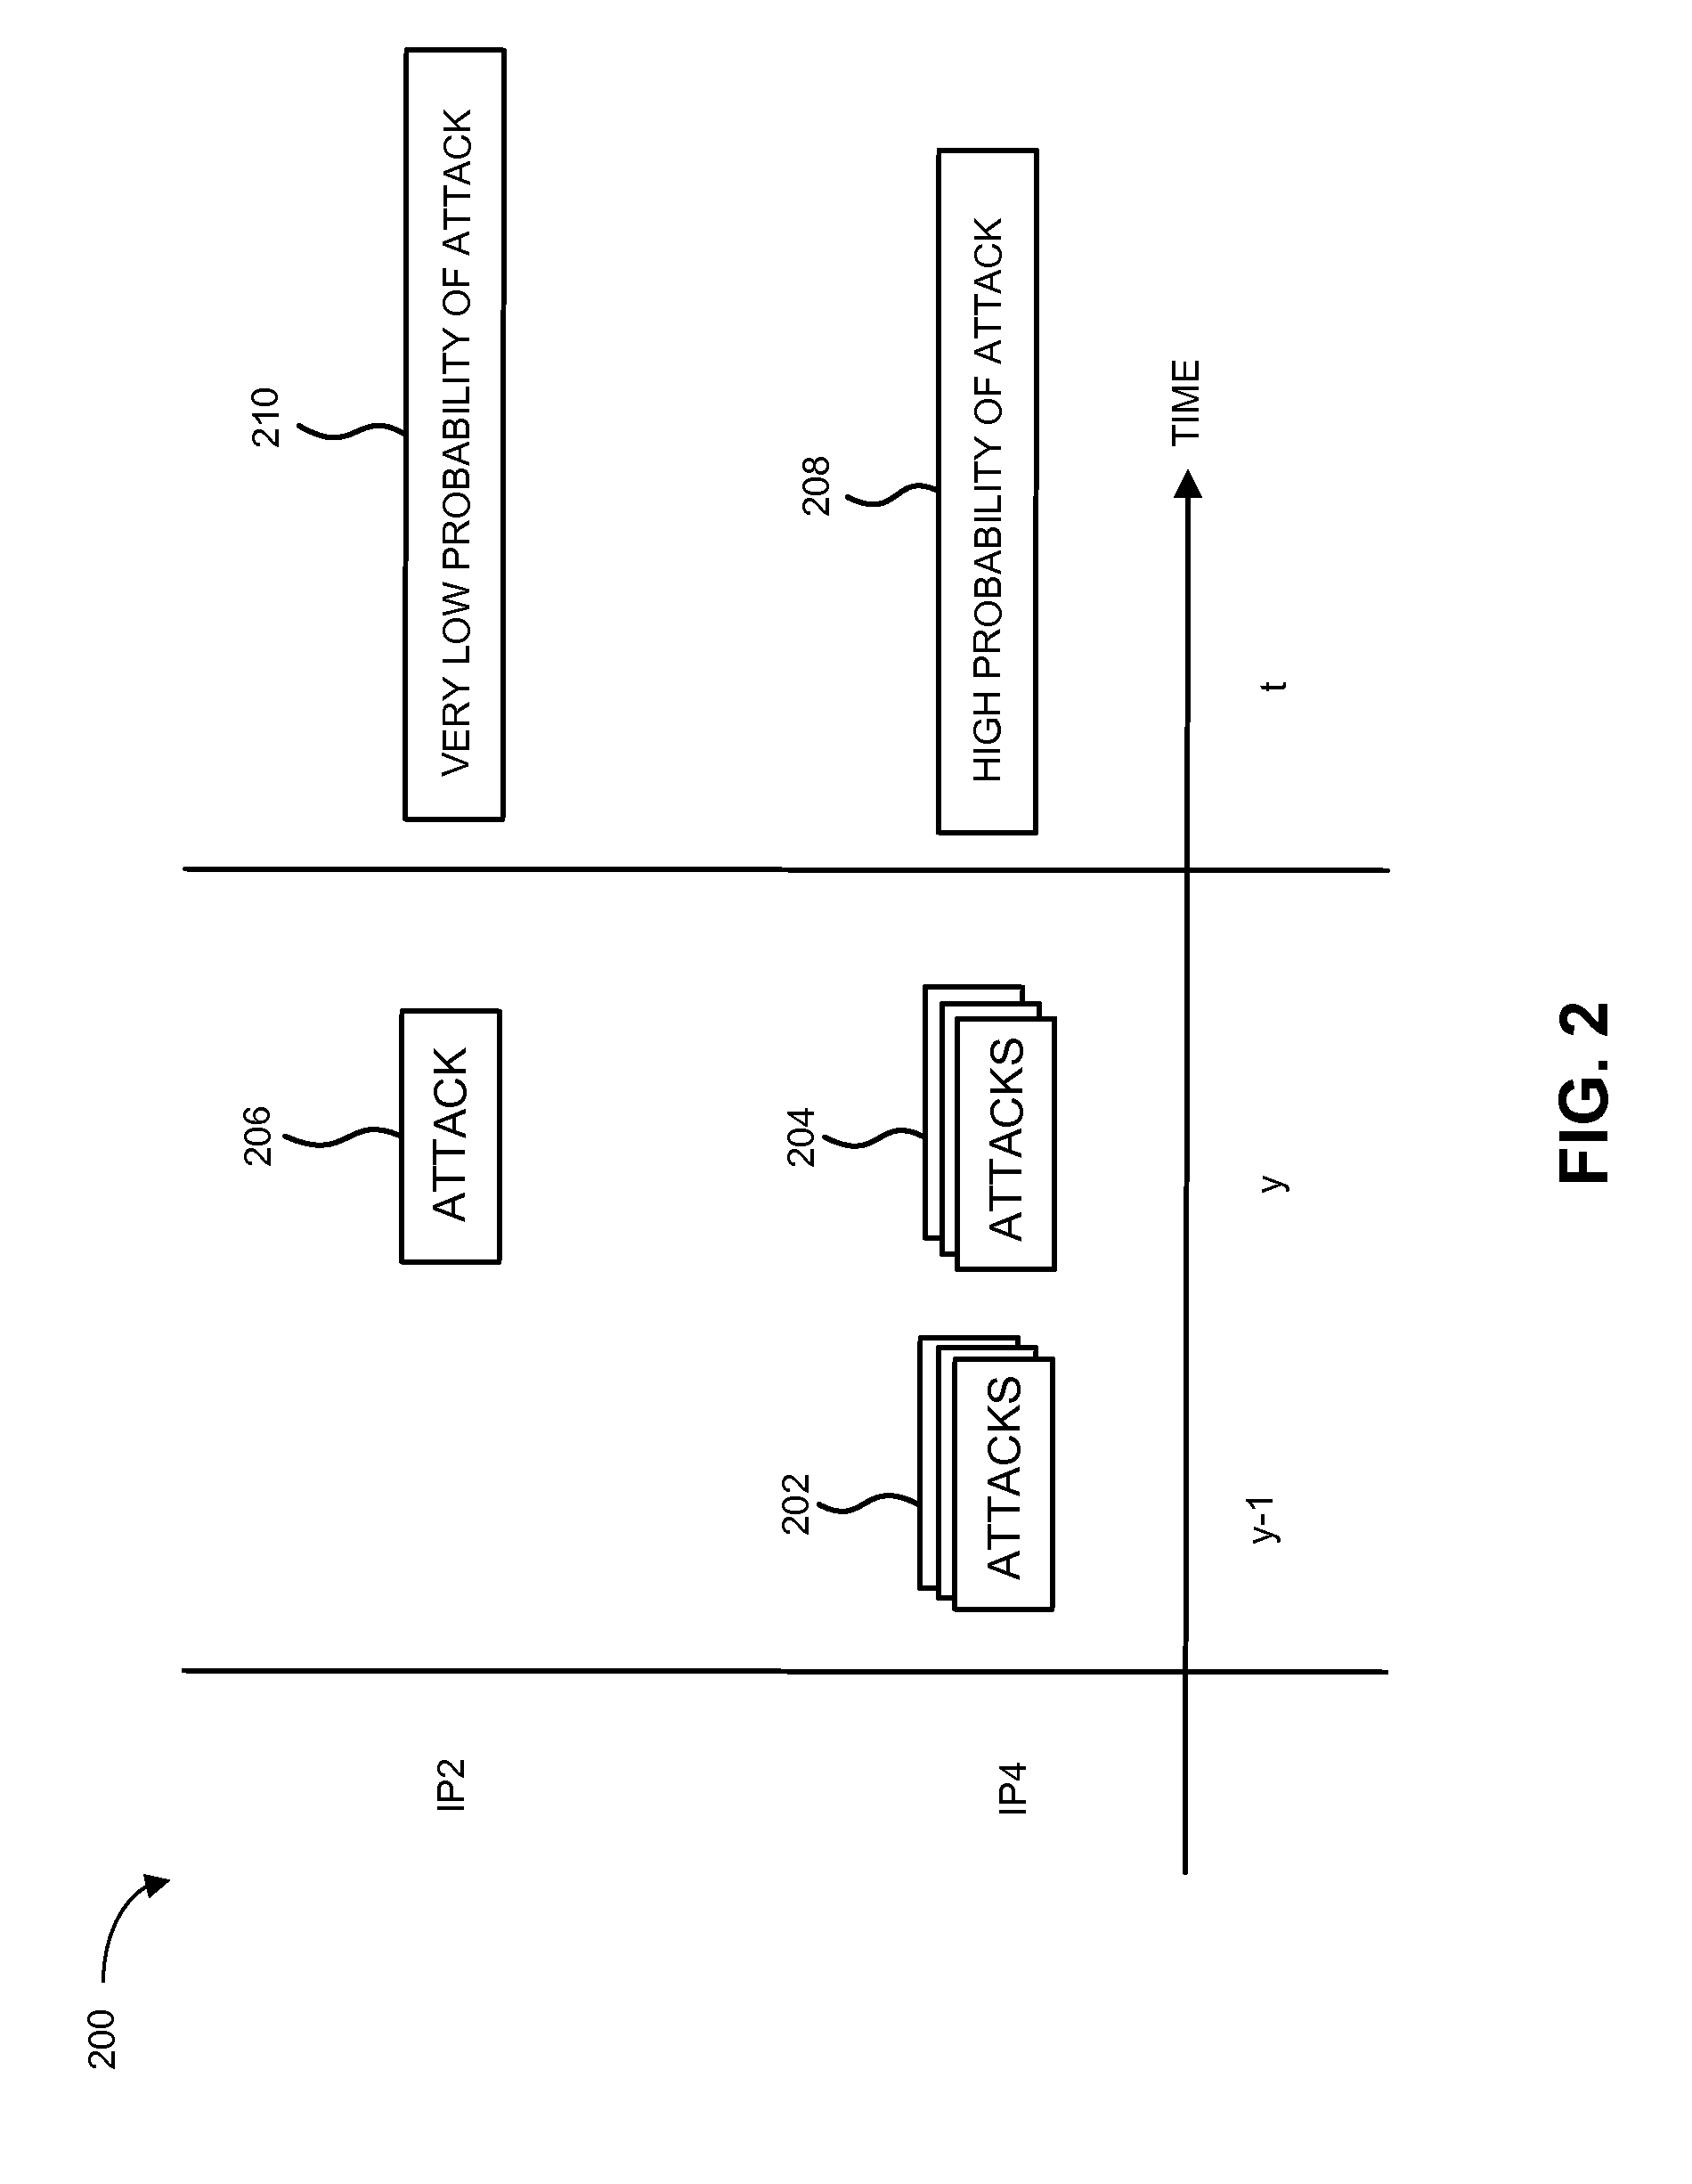 Method and apparatus for privacy and trust enhancing sharing of data for collaborative analytics